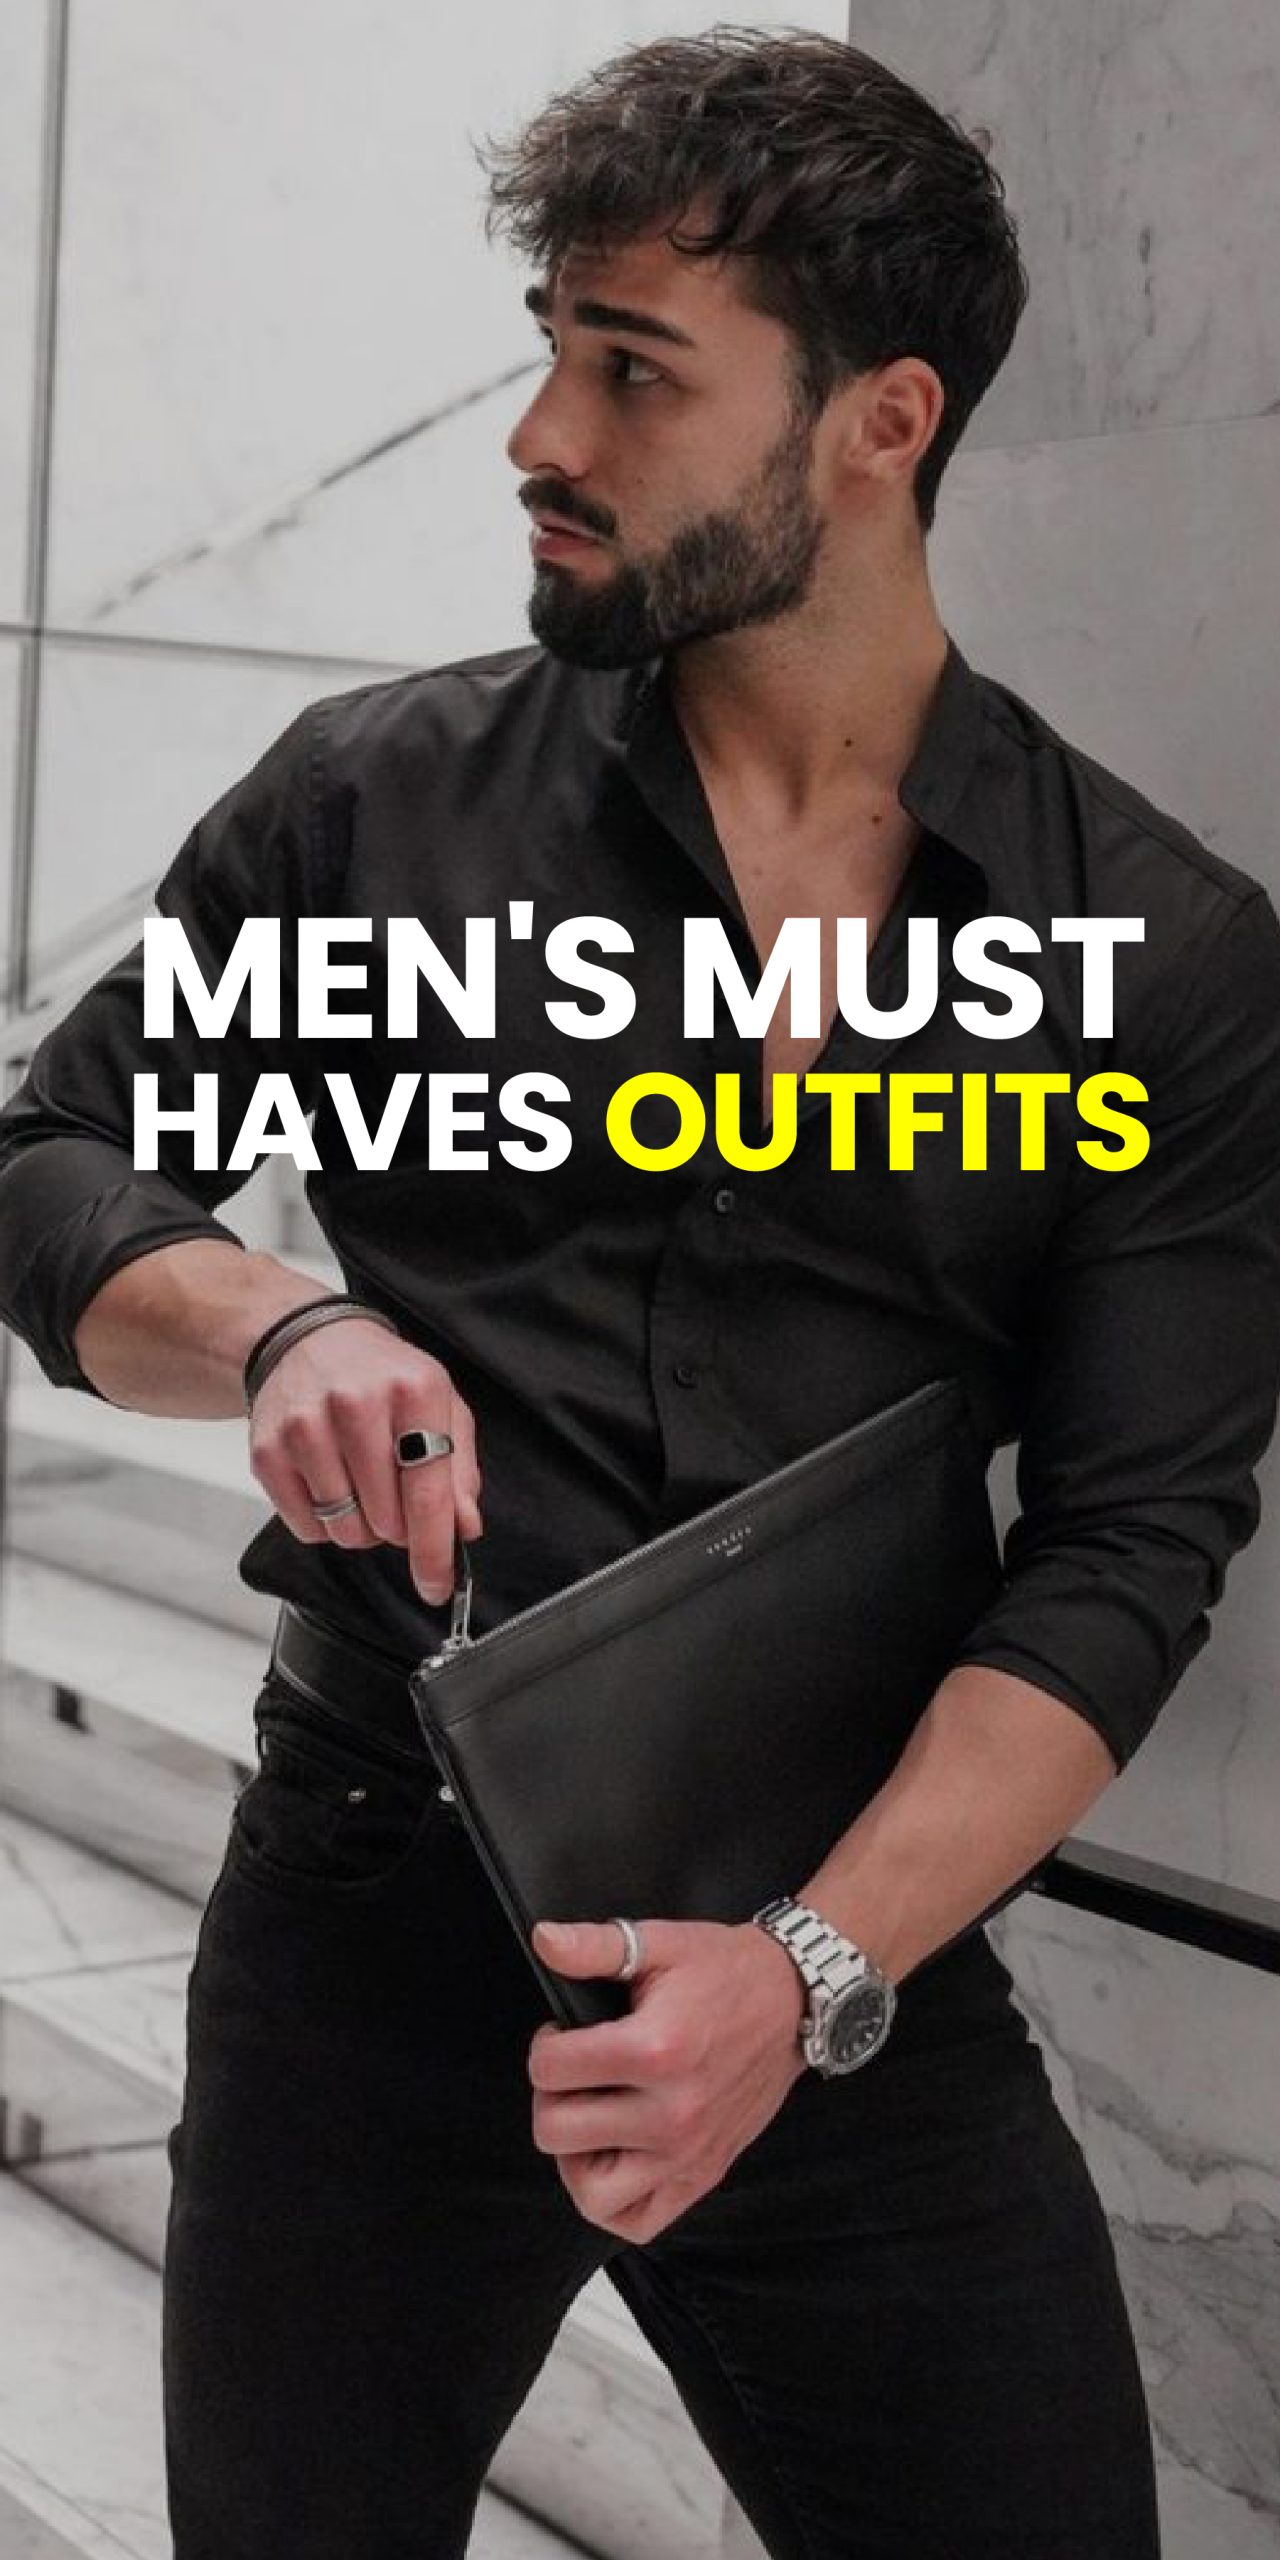 MEN’S MUST HAVE OUTFITS